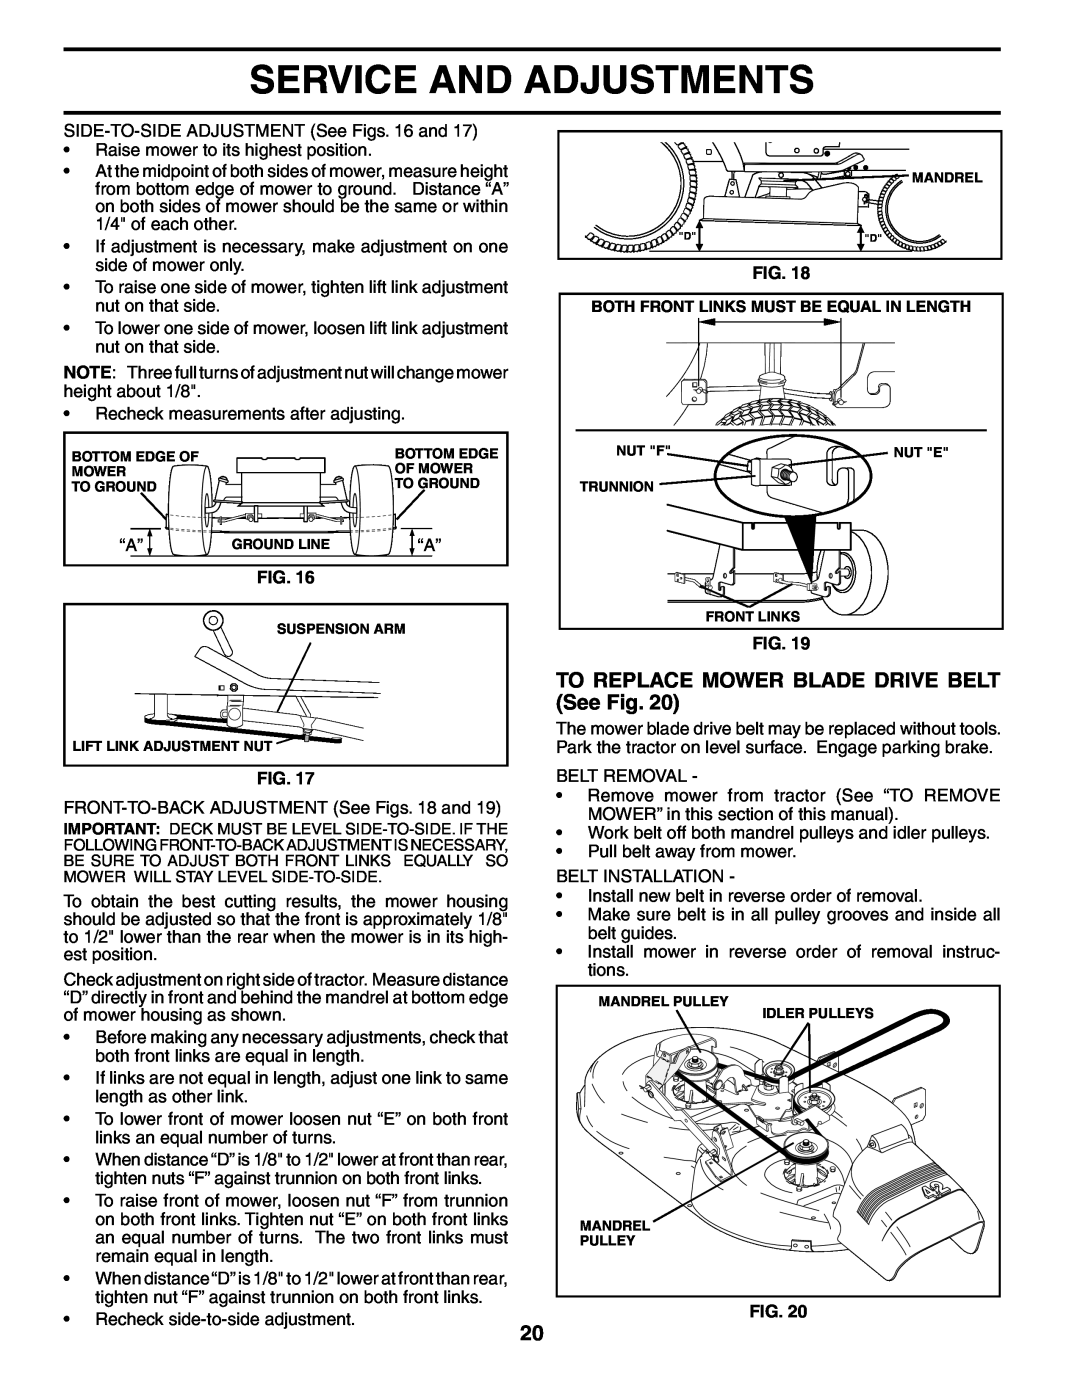 Poulan 195018 manual TO REPLACE MOWER BLADE DRIVE BELT See Fig, Service And Adjustments 